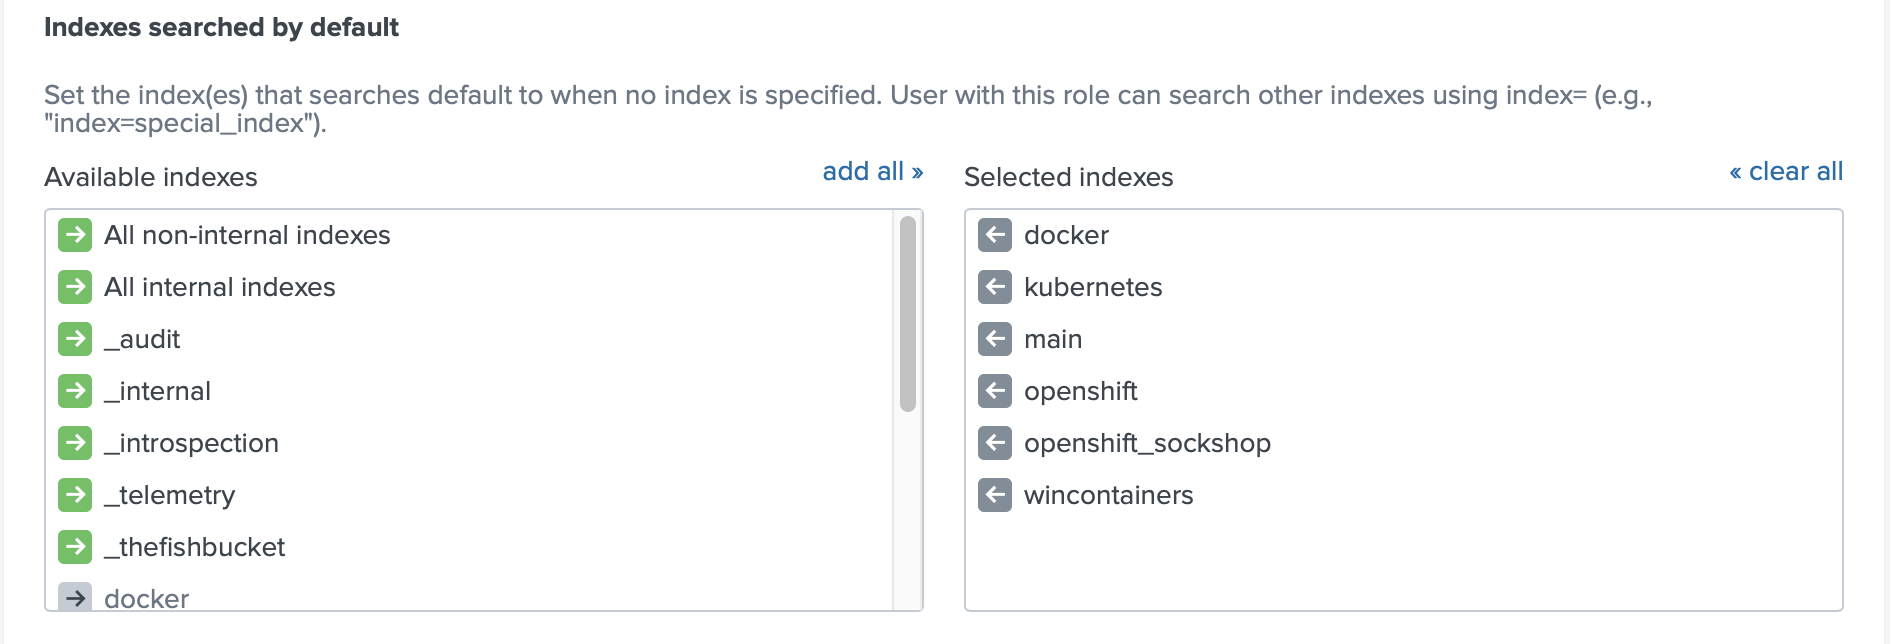 Splunk Admin Role - Indexes Searched by Default